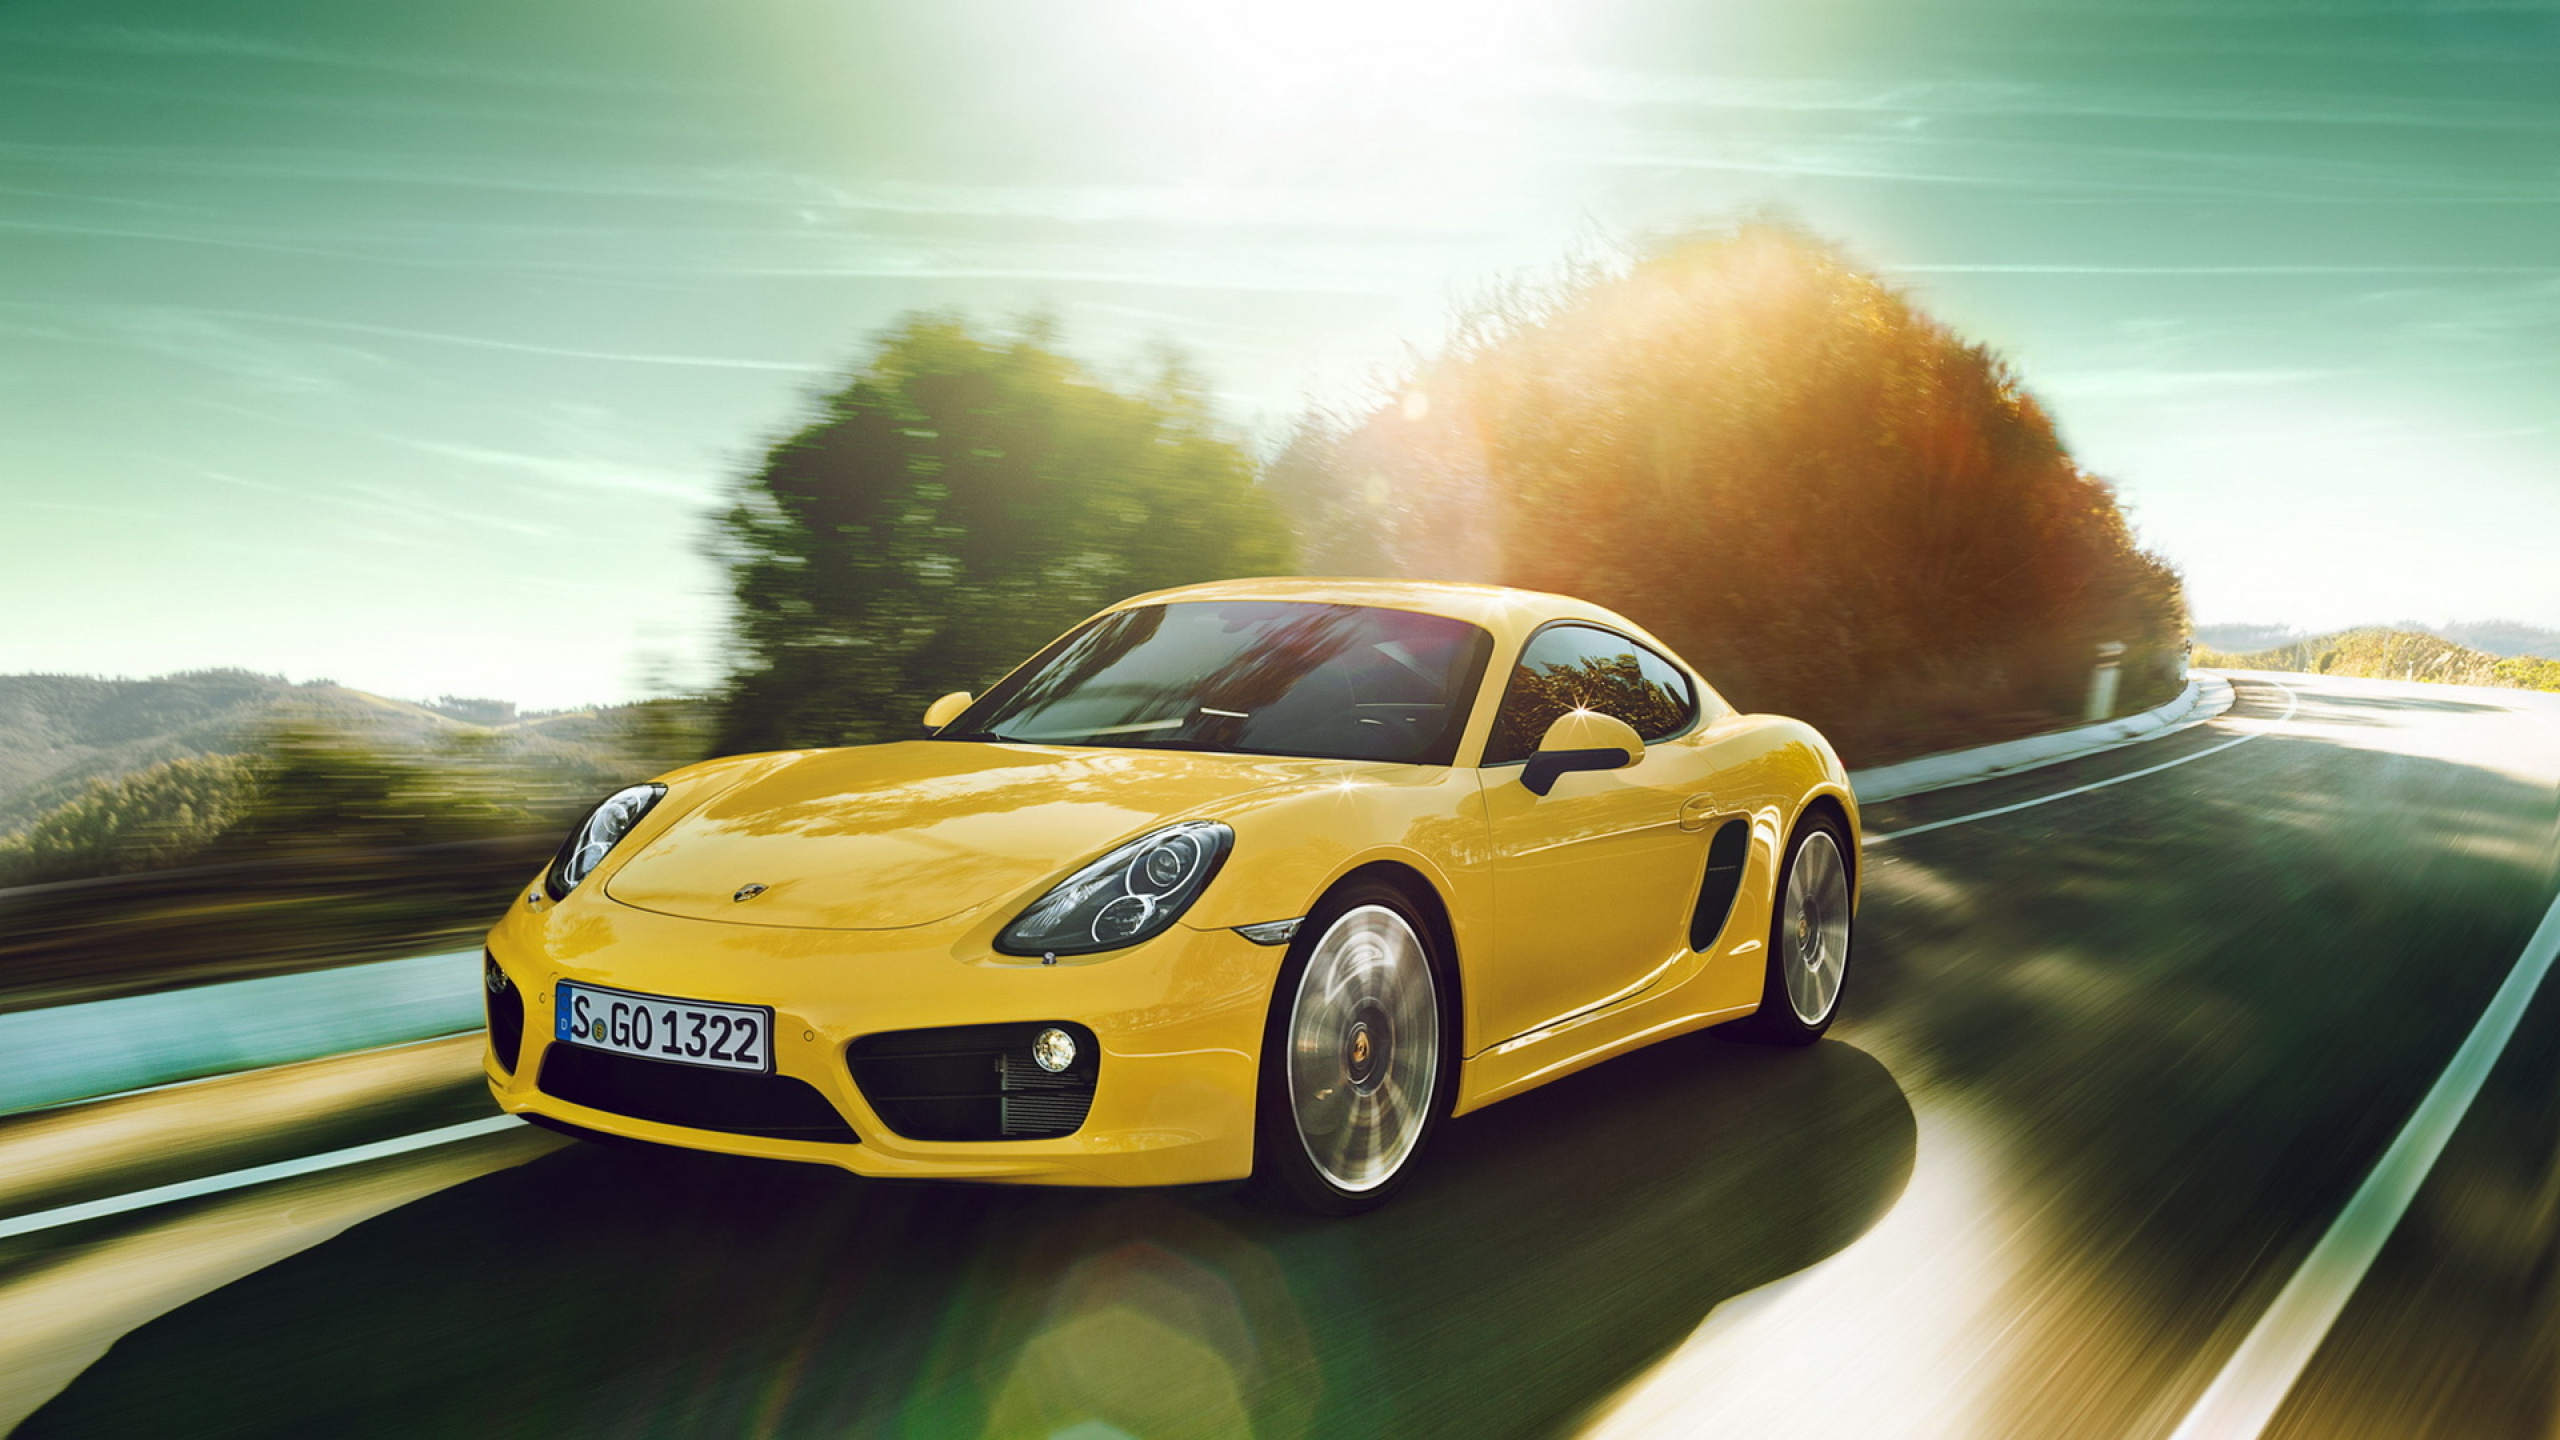 Yellow Porsche 911 on Road During Daytime. Wallpaper in 2560x1440 Resolution